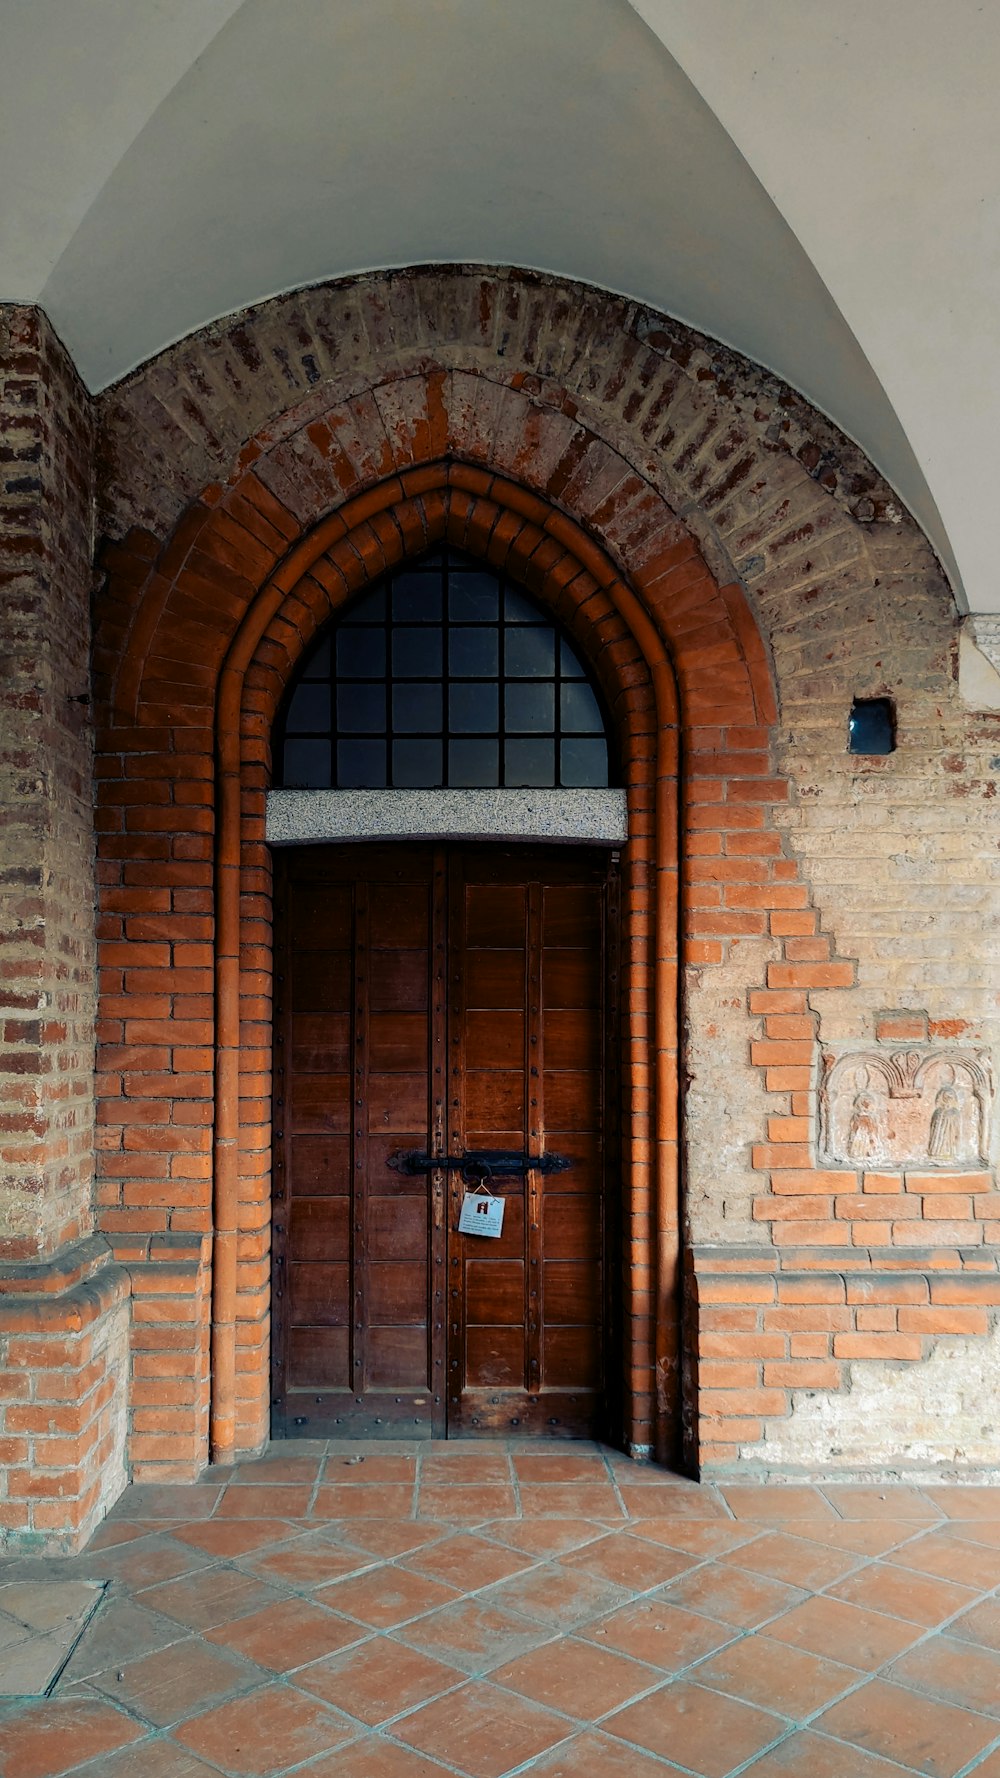 an arched doorway with a cross on the door